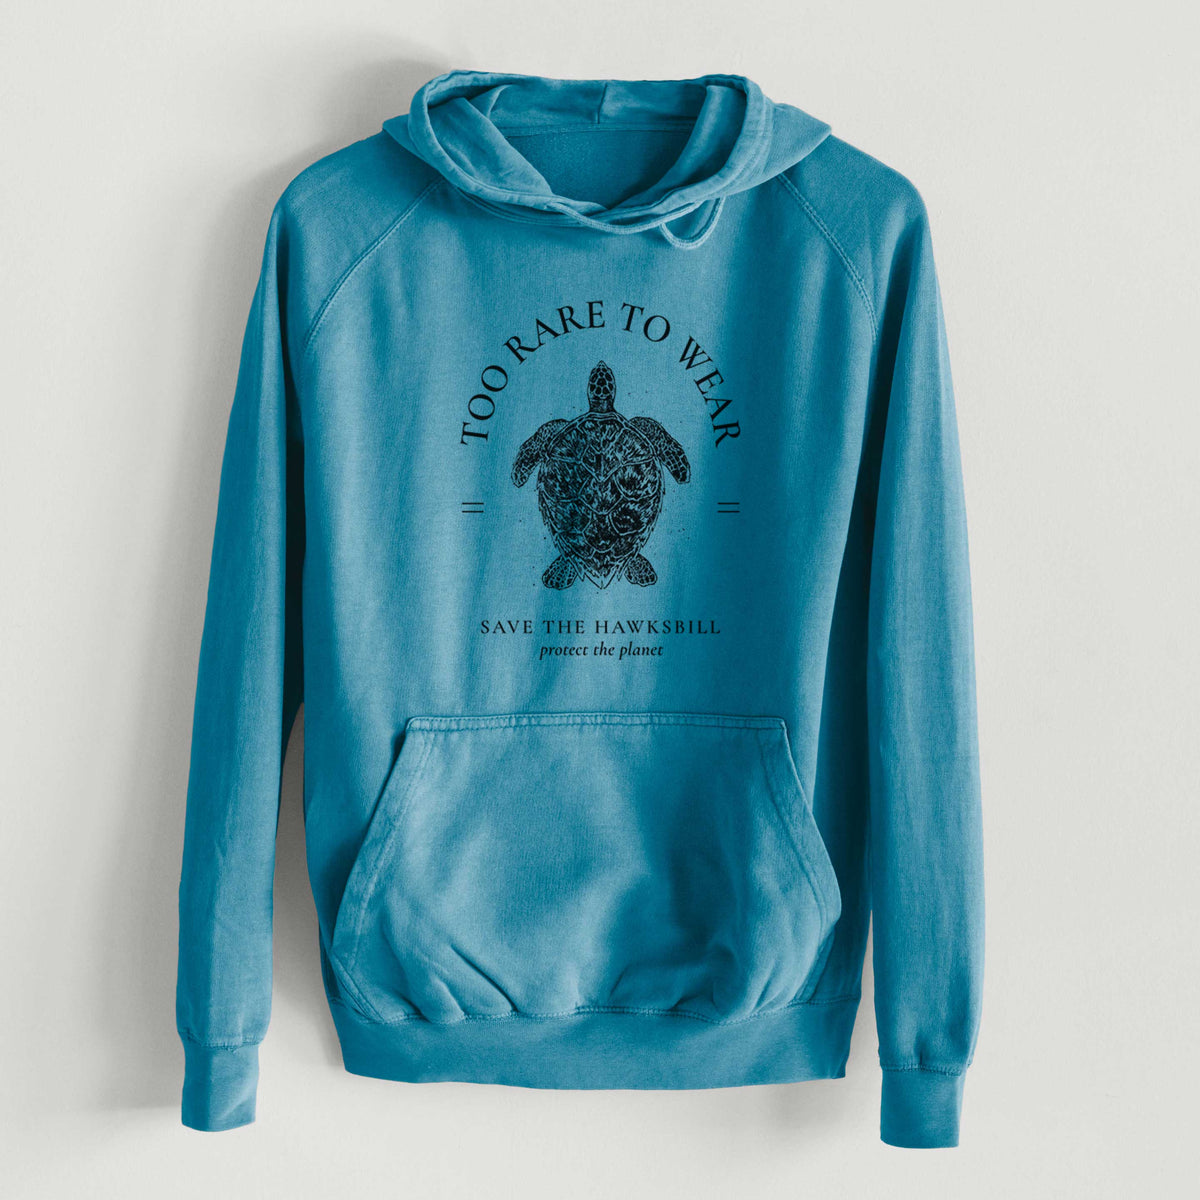 Too Rare to Wear - Save the Hawksbill  - Mid-Weight Unisex Vintage 100% Cotton Hoodie